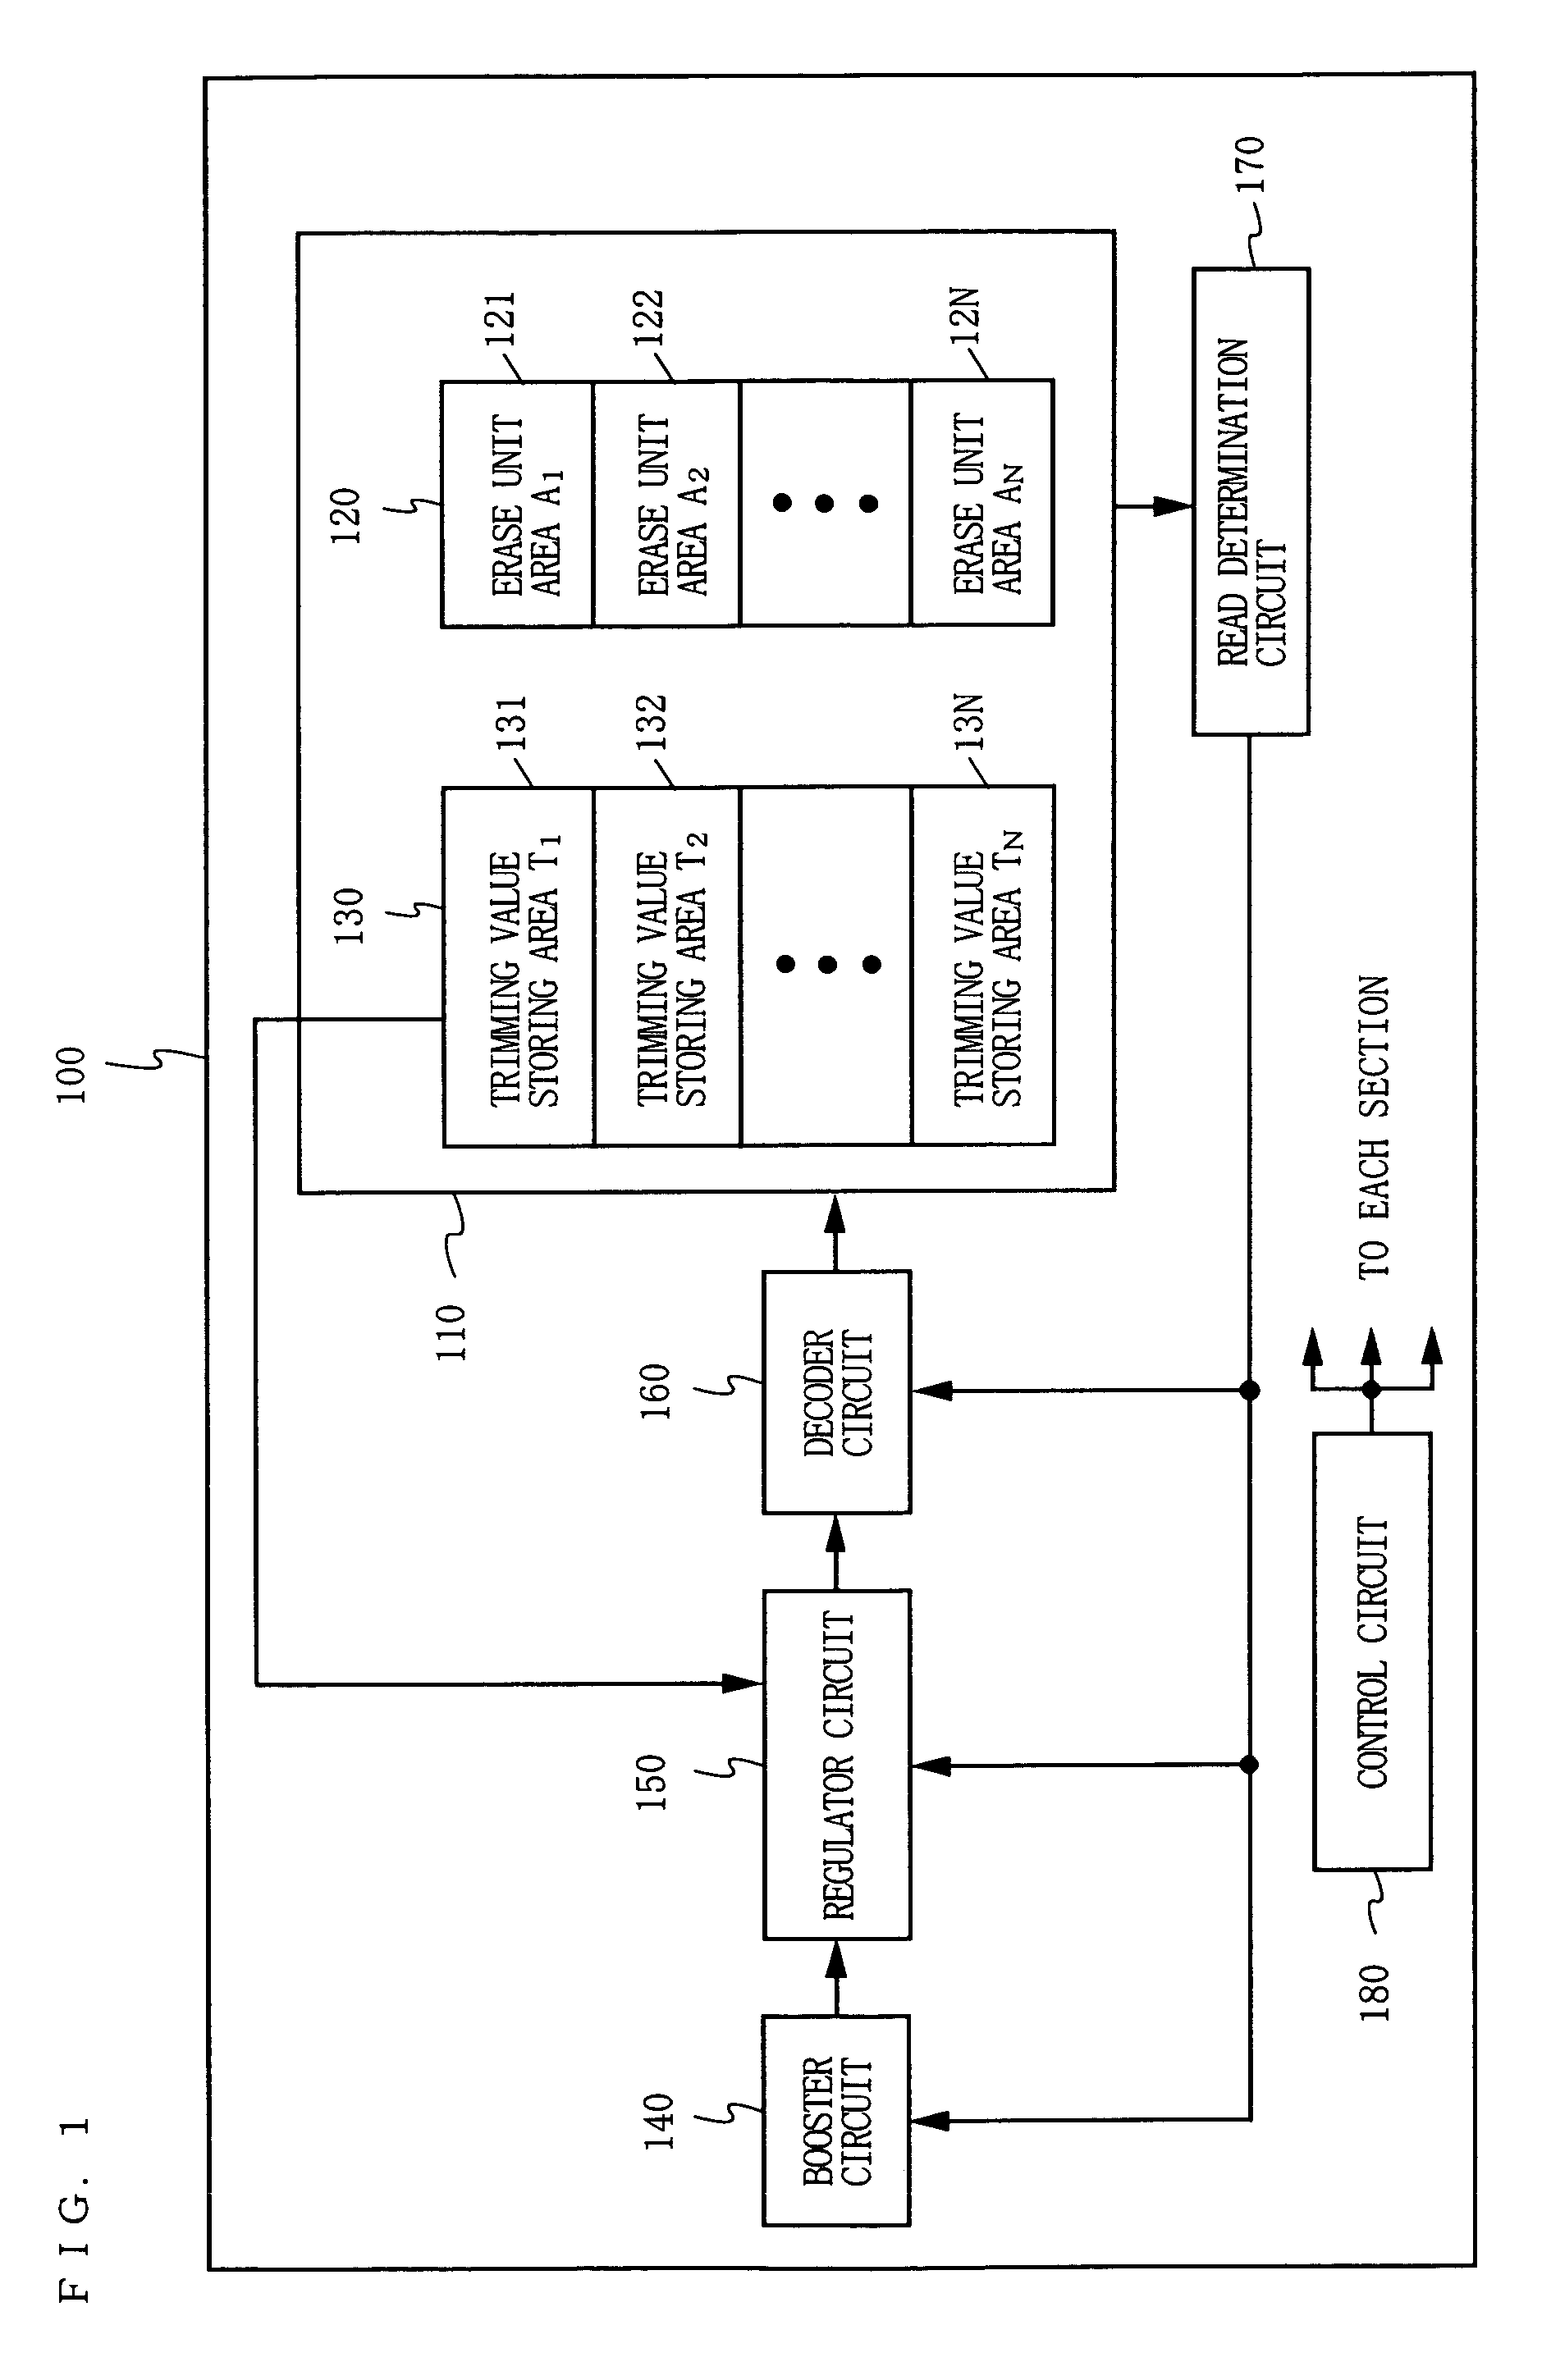 Non-volatile memory device with threshold voltage control function